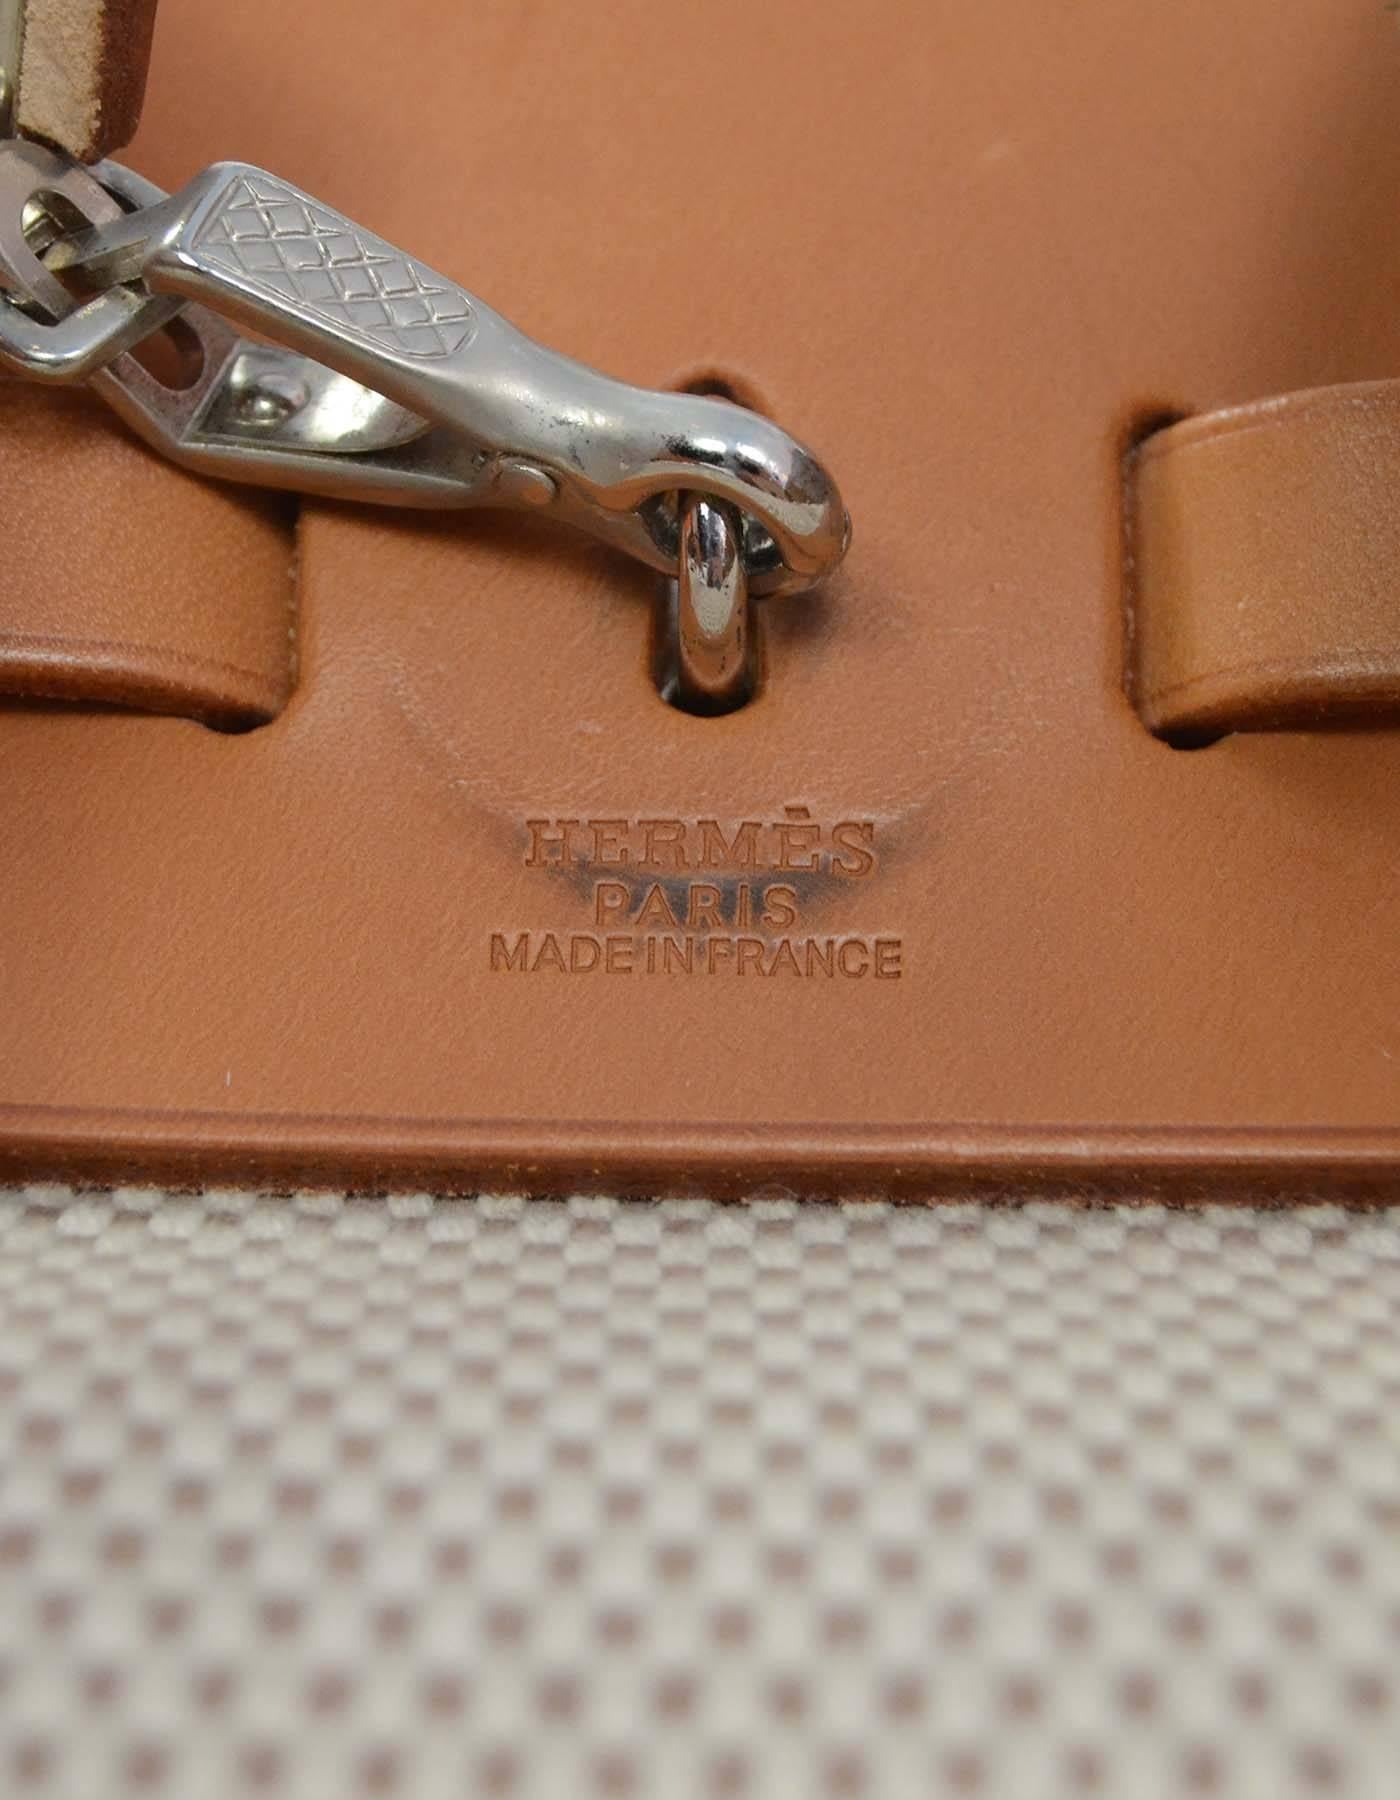 Hermes Tan and Beige Toile Two-in-One Herbag with Dusbag 3